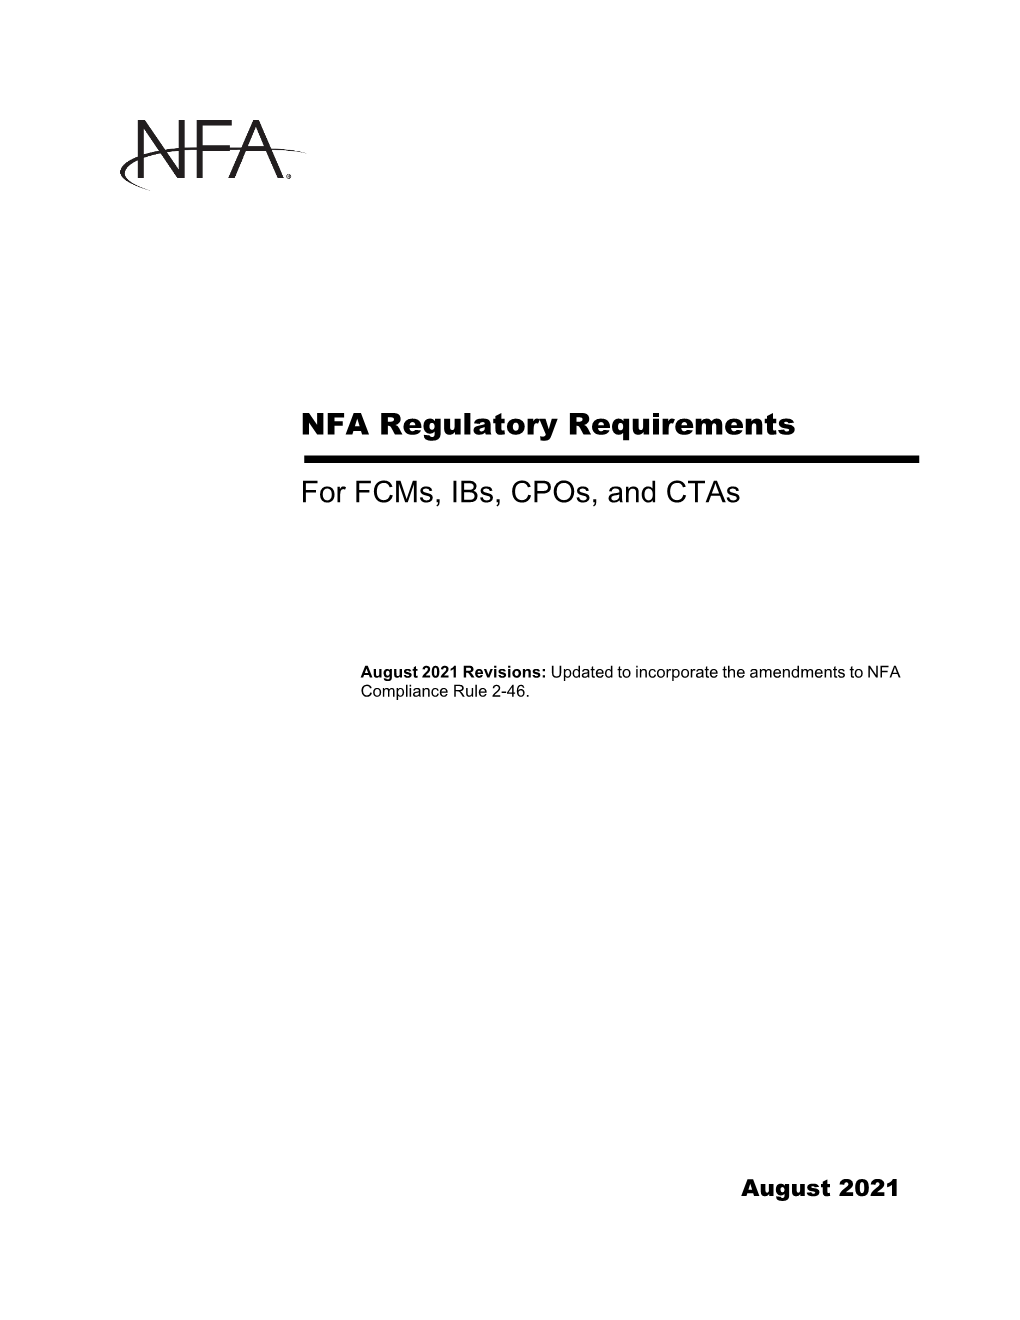 NFA Regulatory Requirements for Fcms, Ibs, Cpos and Ctas